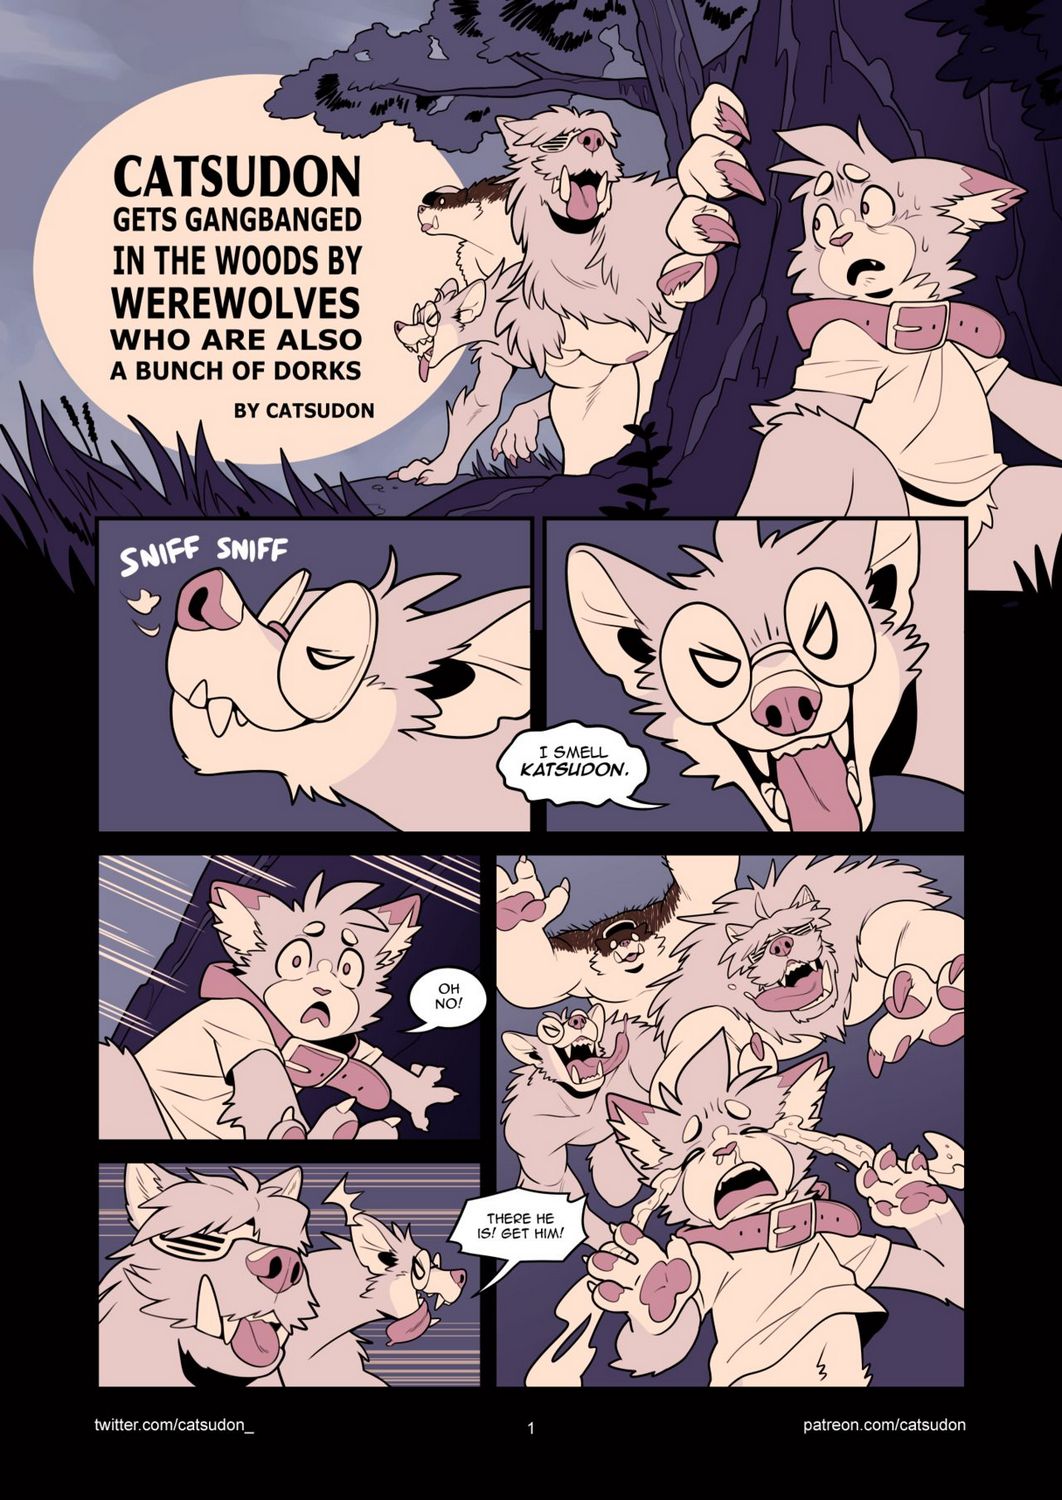 Cover Catsudon Gets Gangbanged In The Woods By Werewolves Who Are Also A Bunch Of Dorks